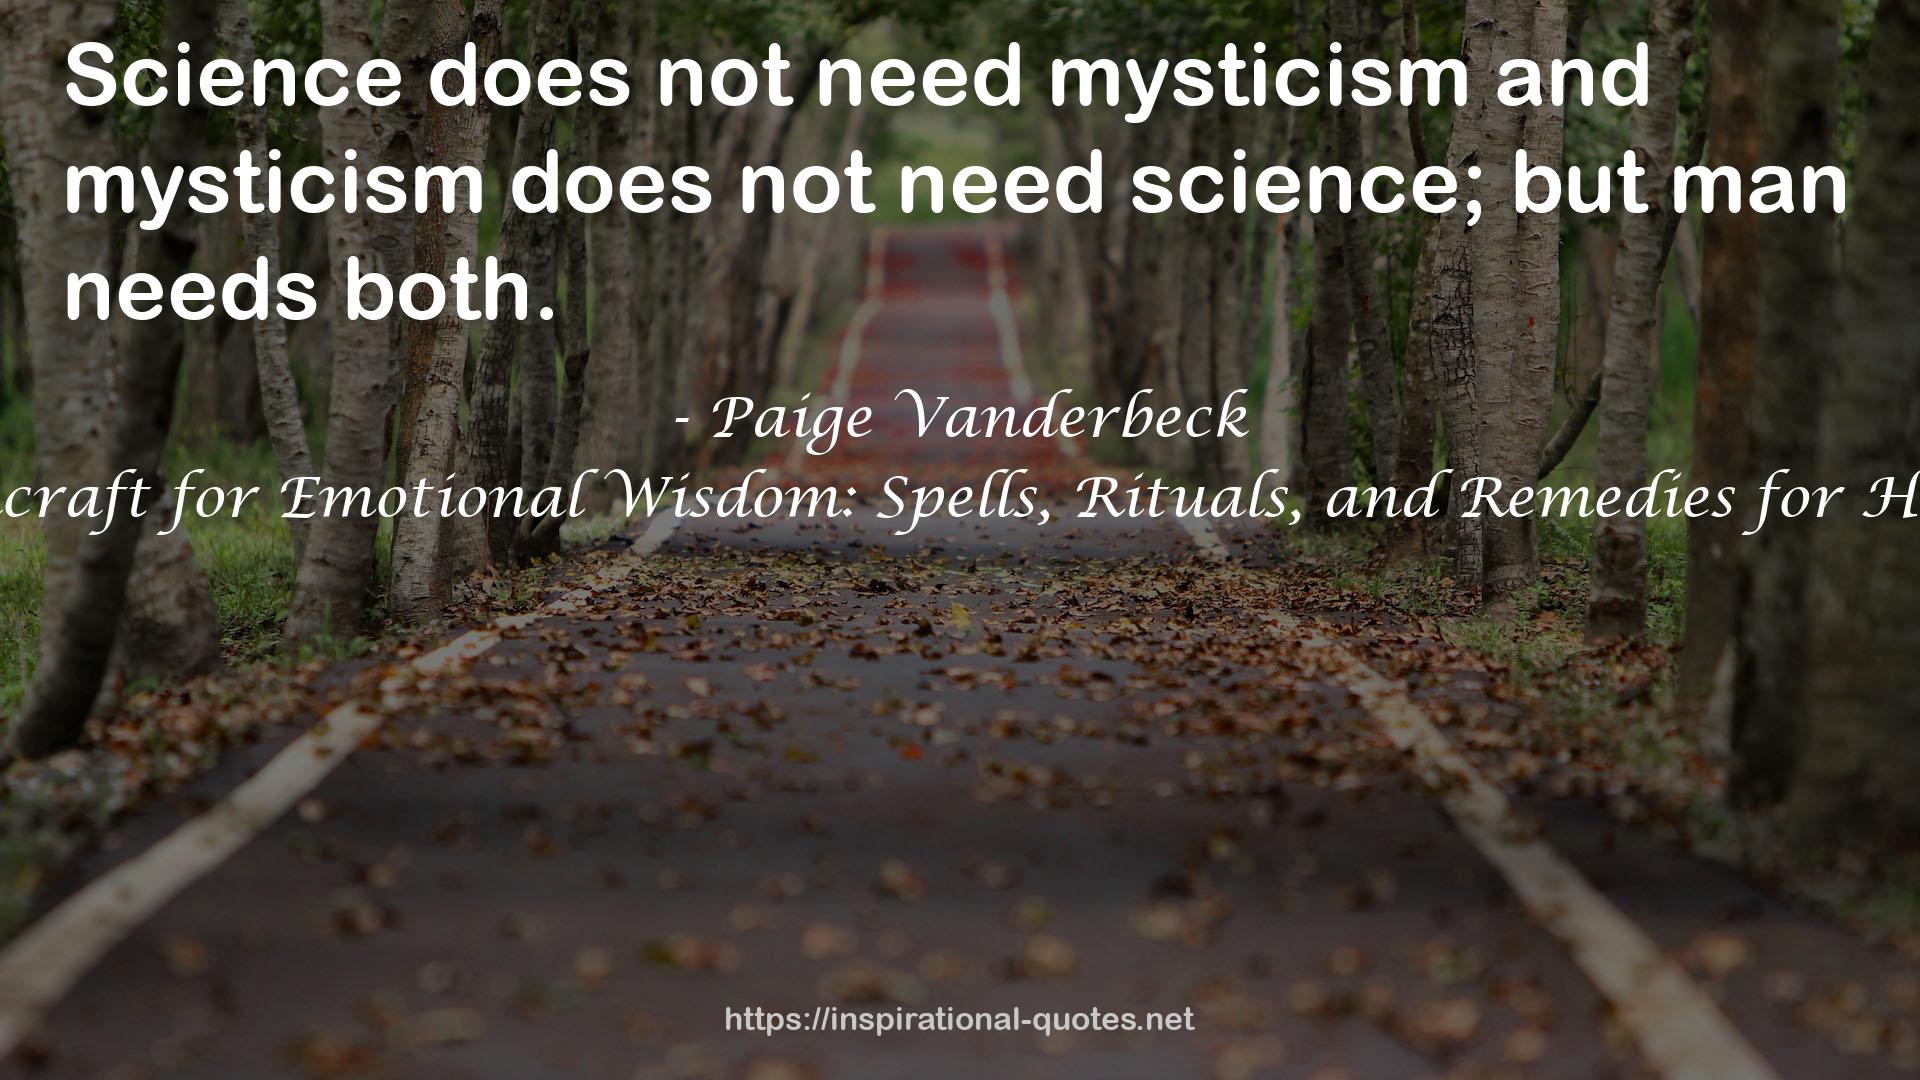 Witchcraft for Emotional Wisdom: Spells, Rituals, and Remedies for Healing QUOTES